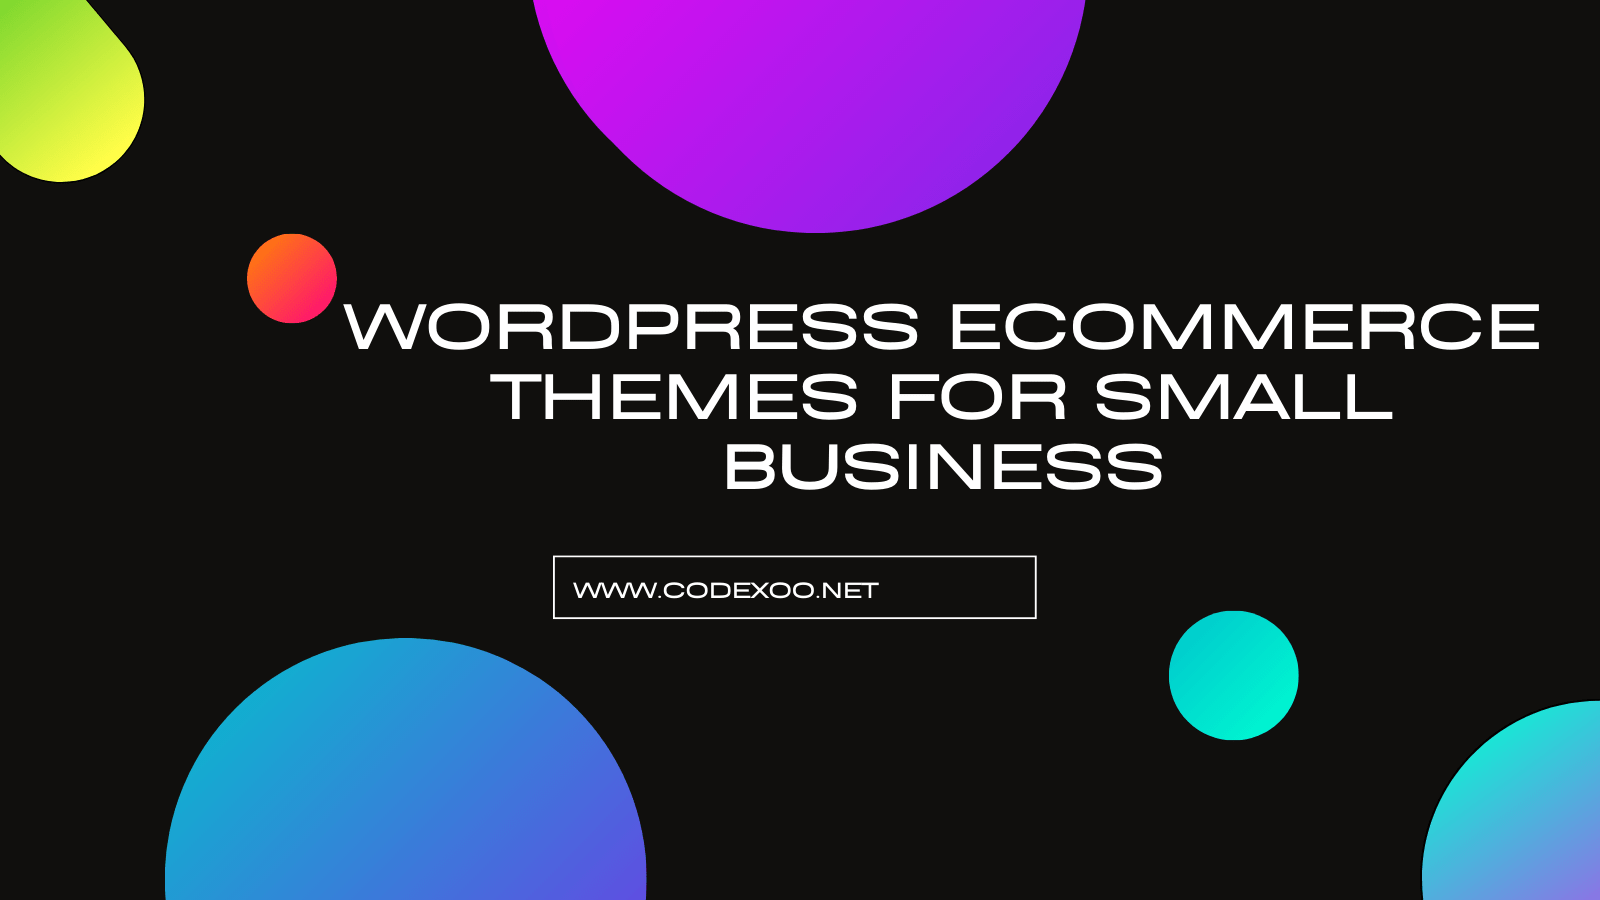 WordPress eCommerce Themes For Small Business